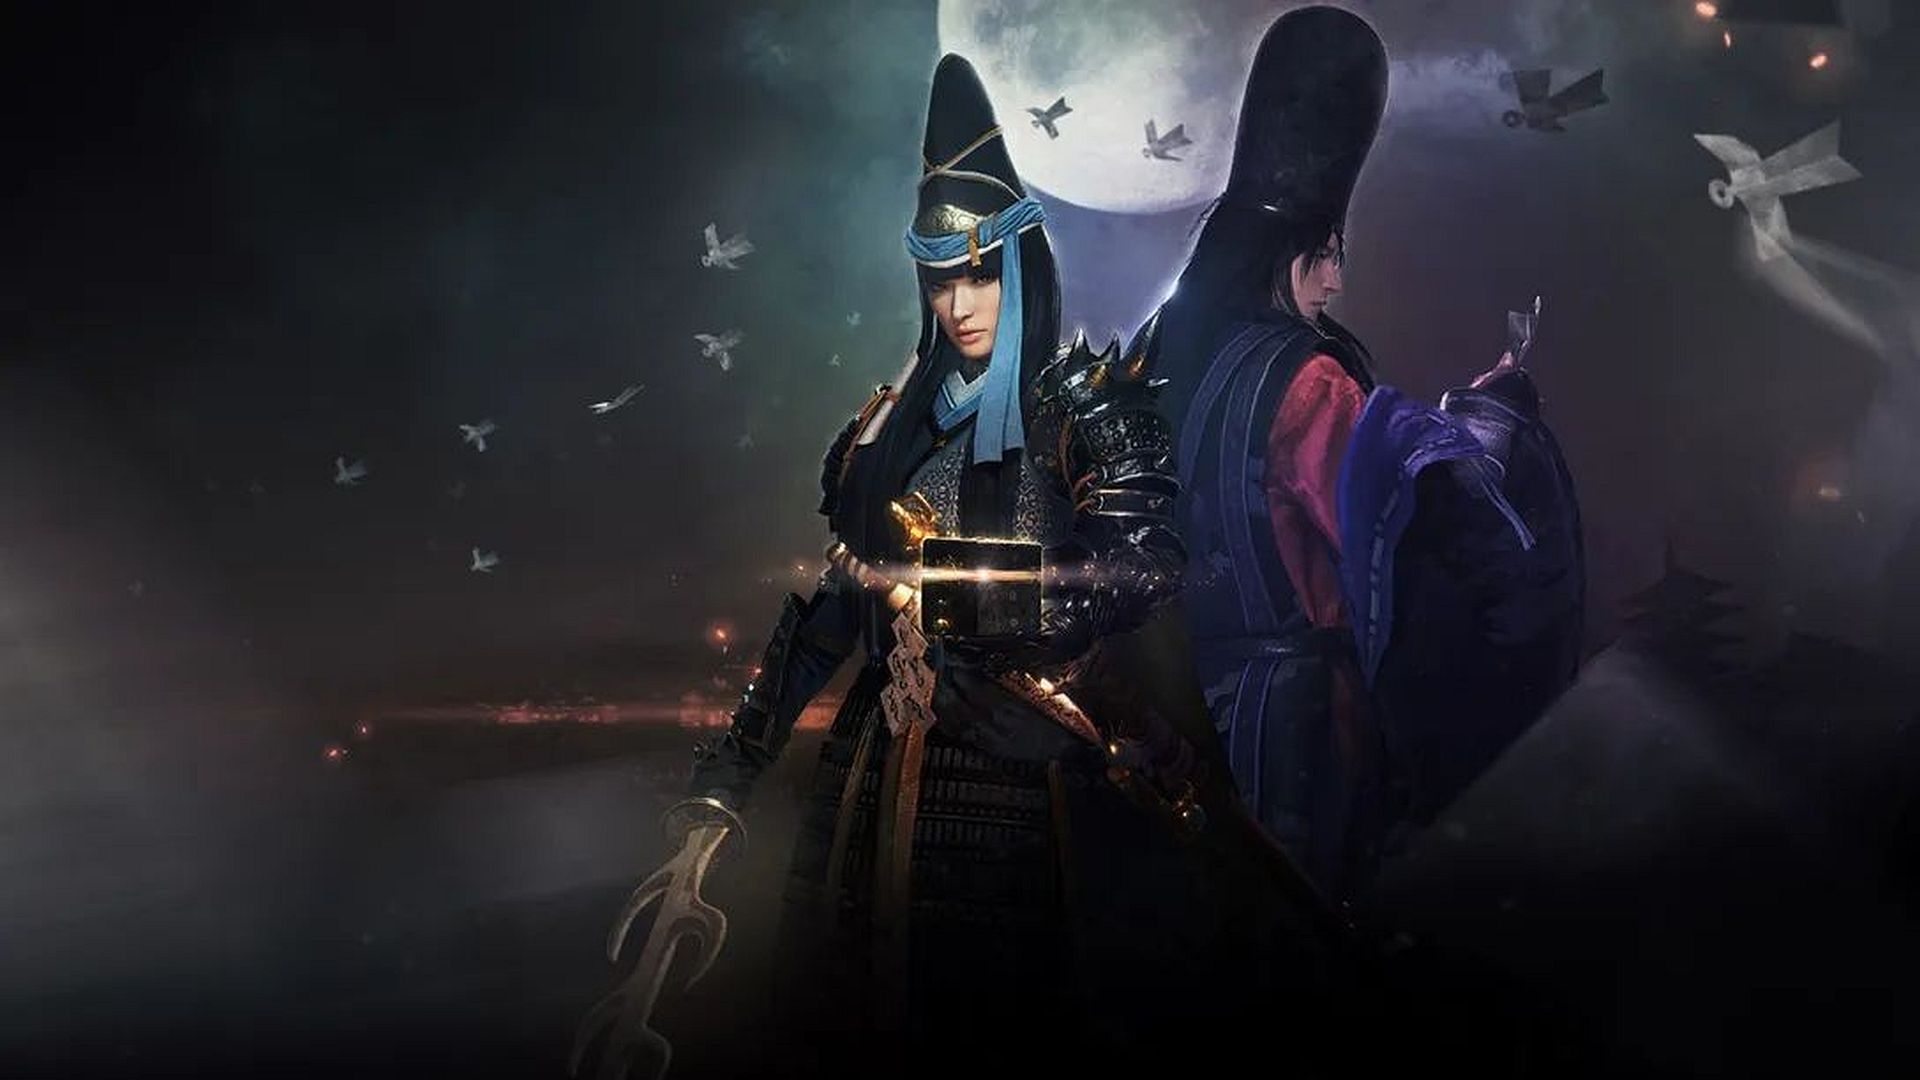 Image for Nioh 2's second DLC Darkness in the Capital lands in October